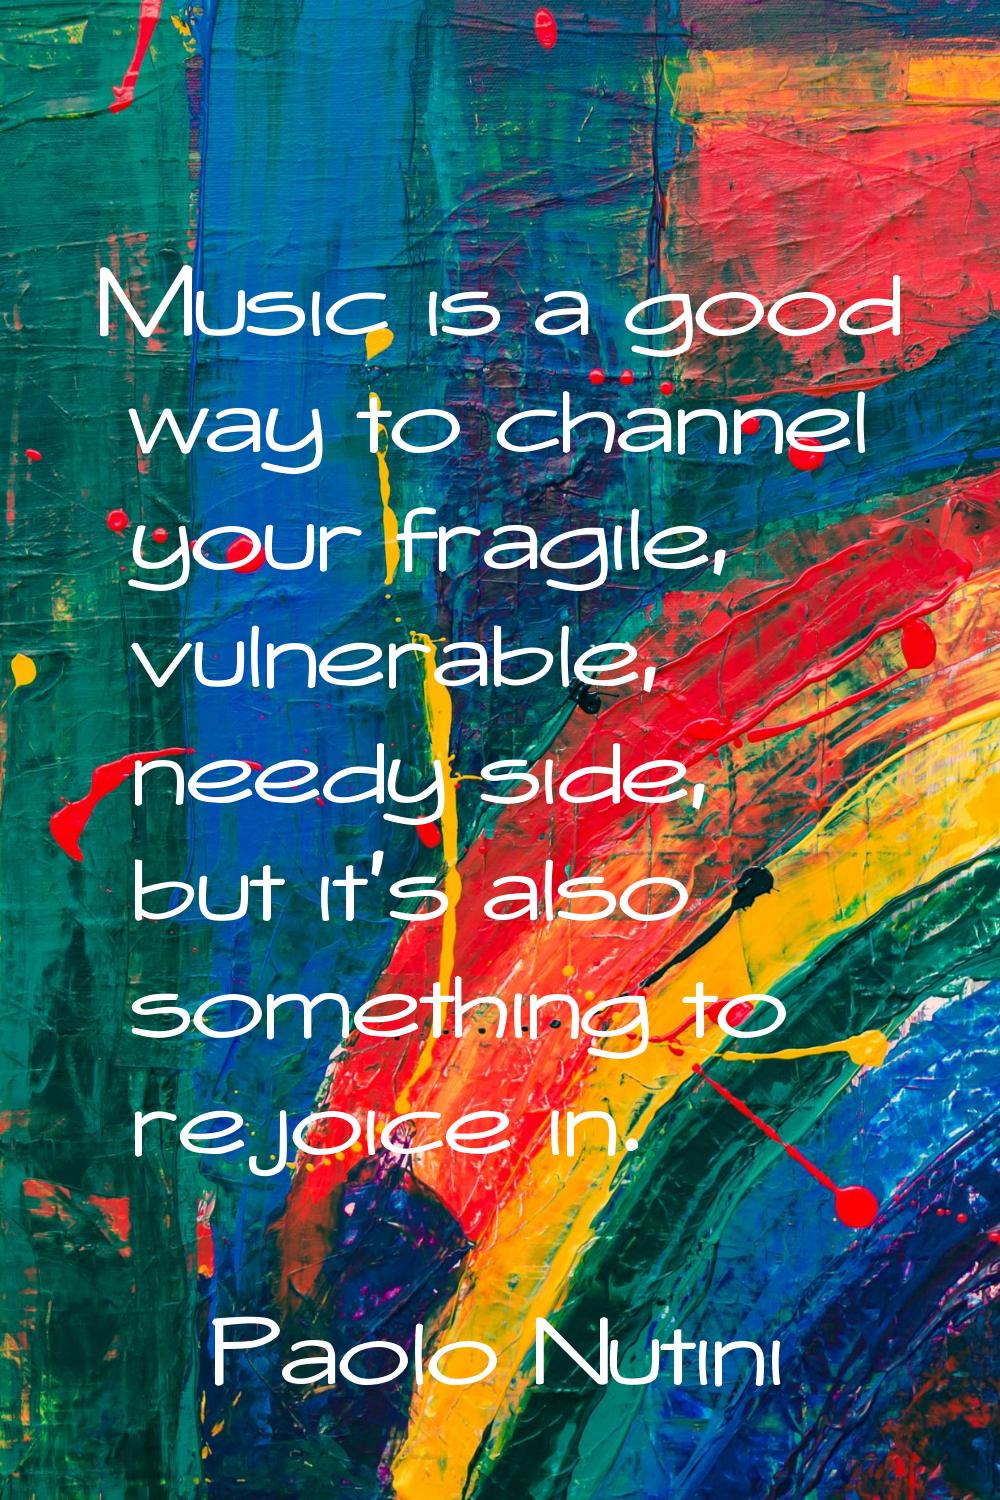 Music is a good way to channel your fragile, vulnerable, needy side, but it's also something to rej